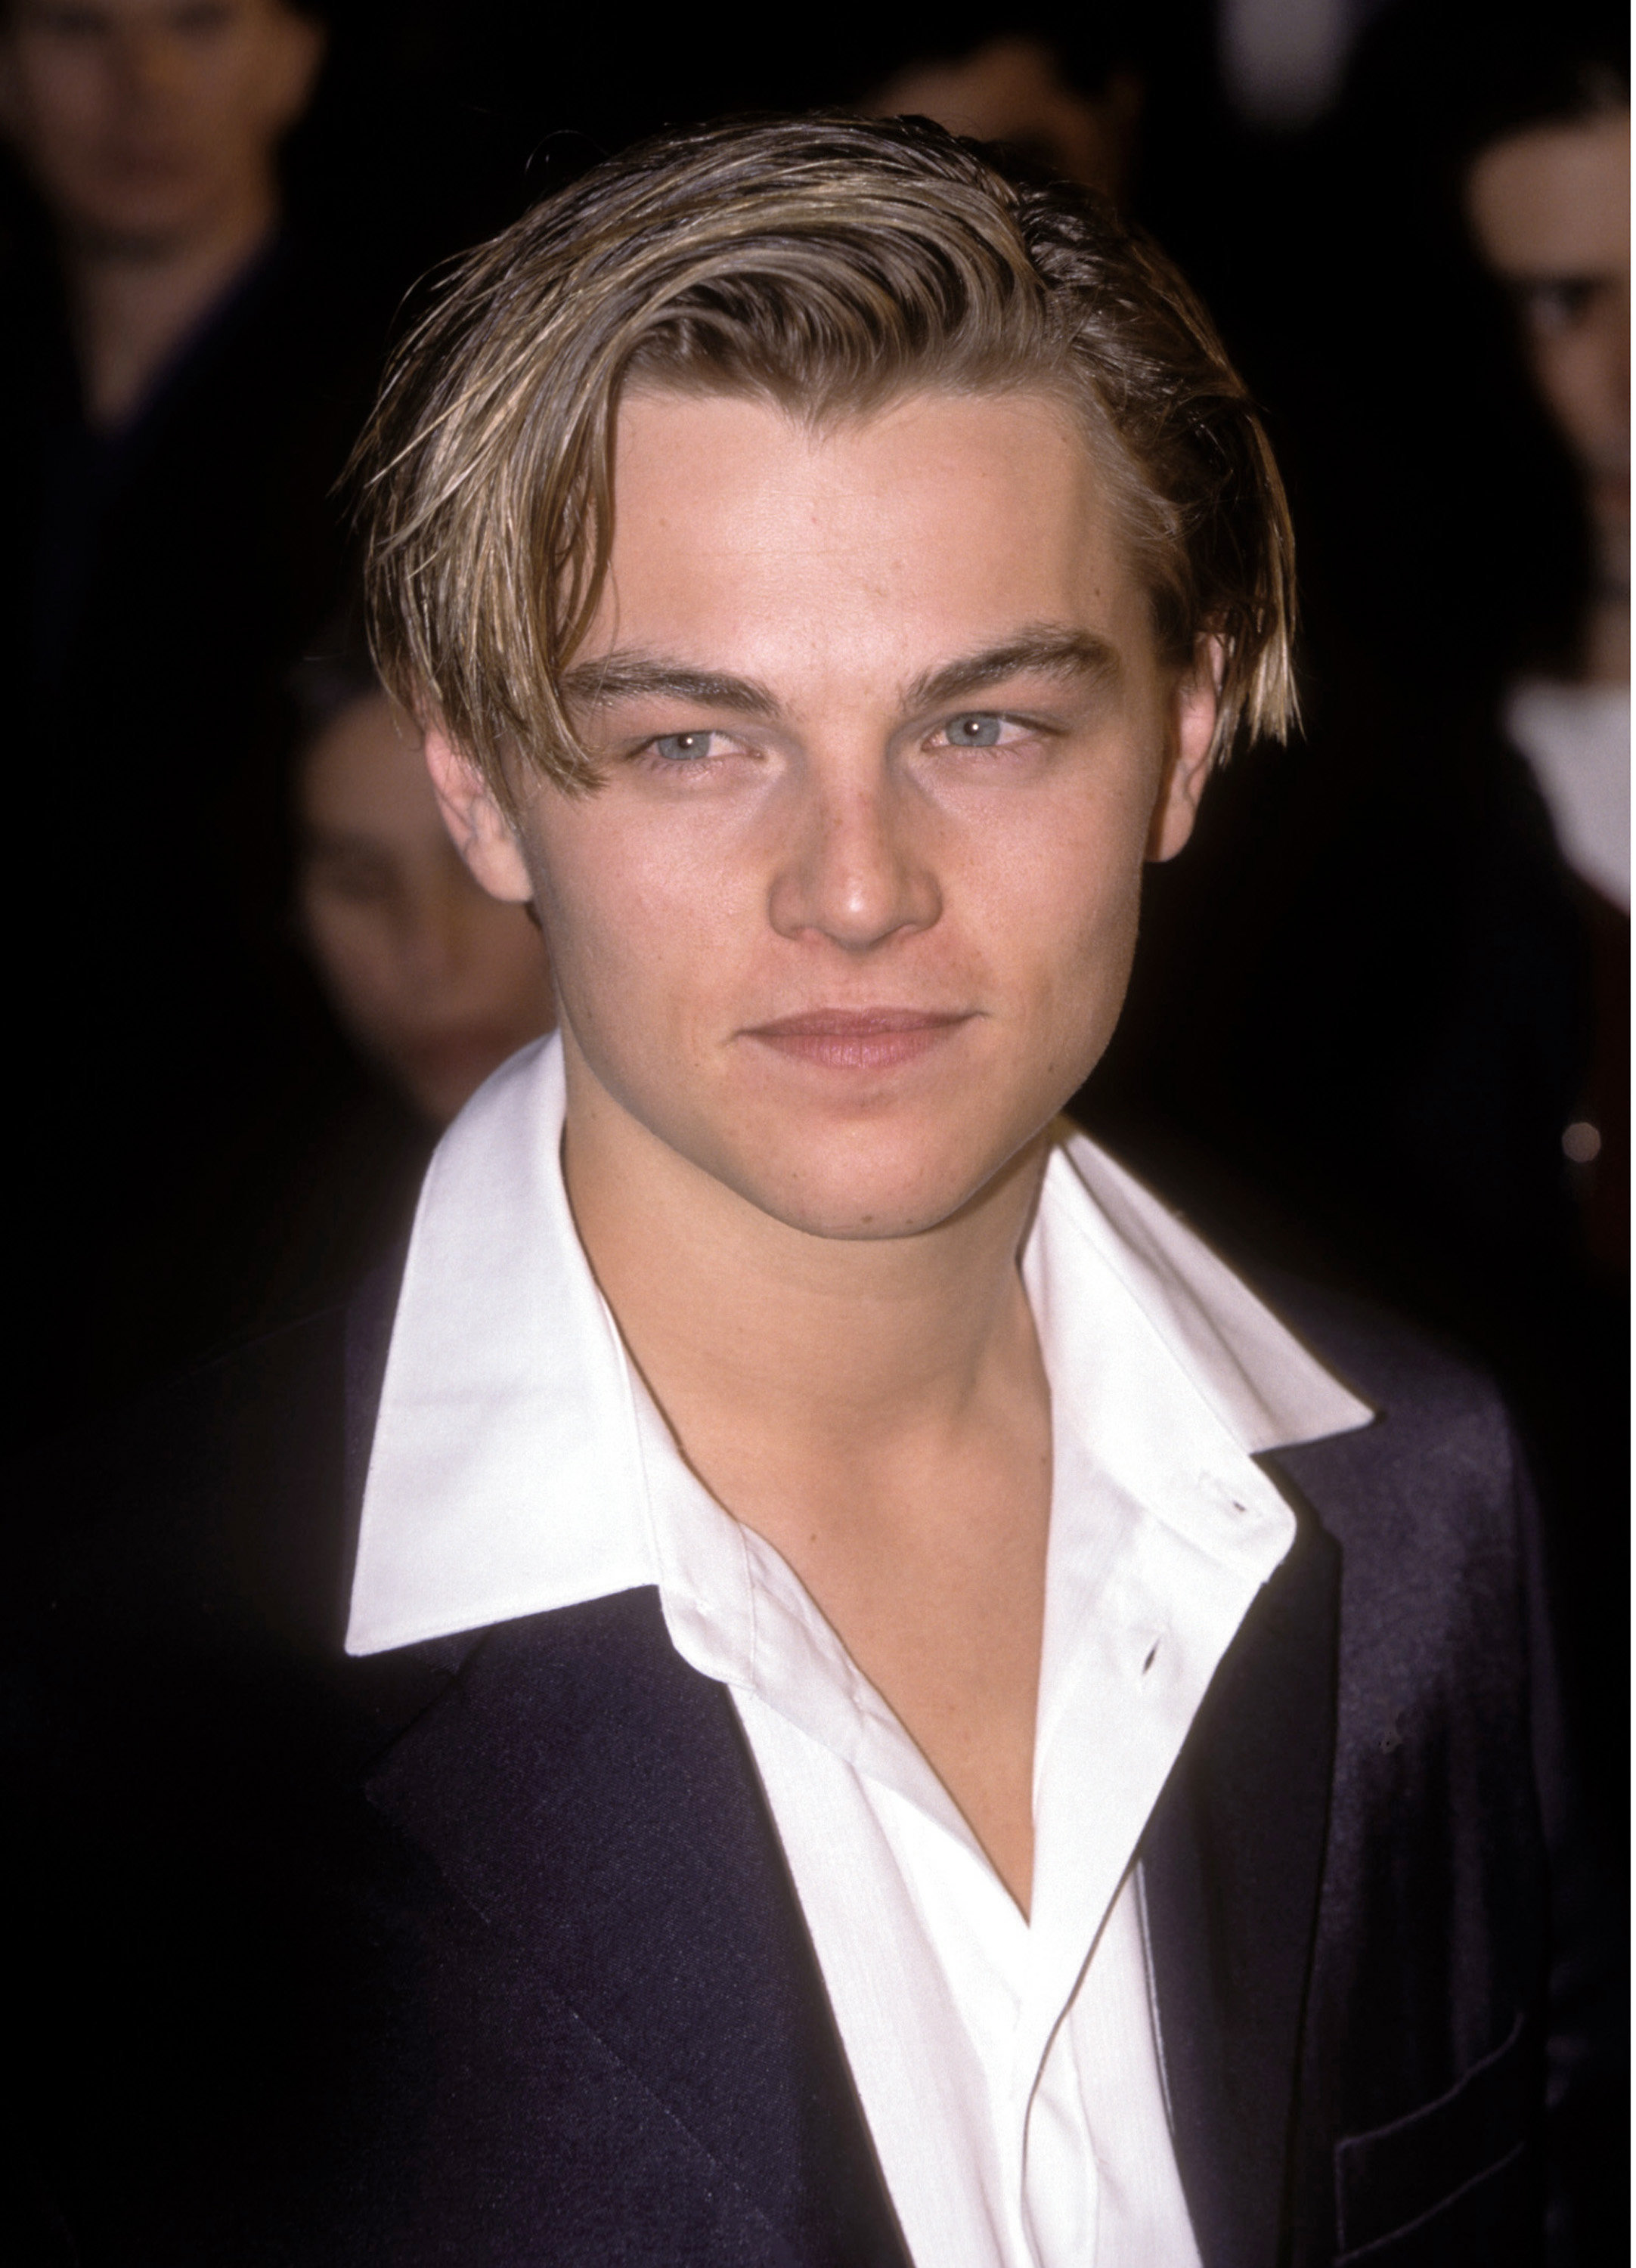 Leonardo DiCaprio turns 40: See his path from teen star to leading man